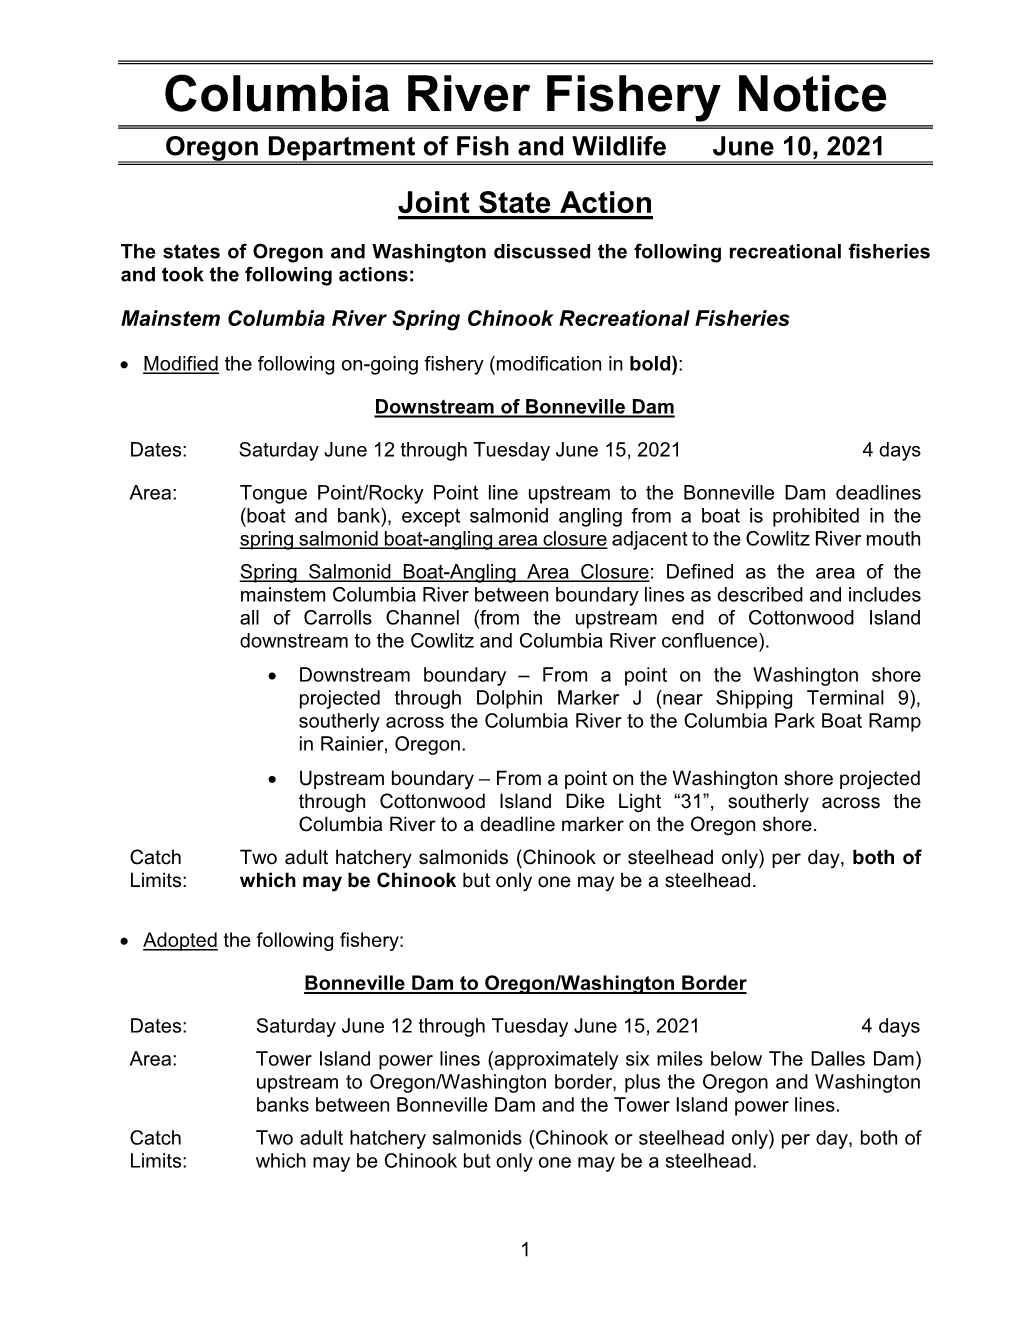 Joint State Action Notice